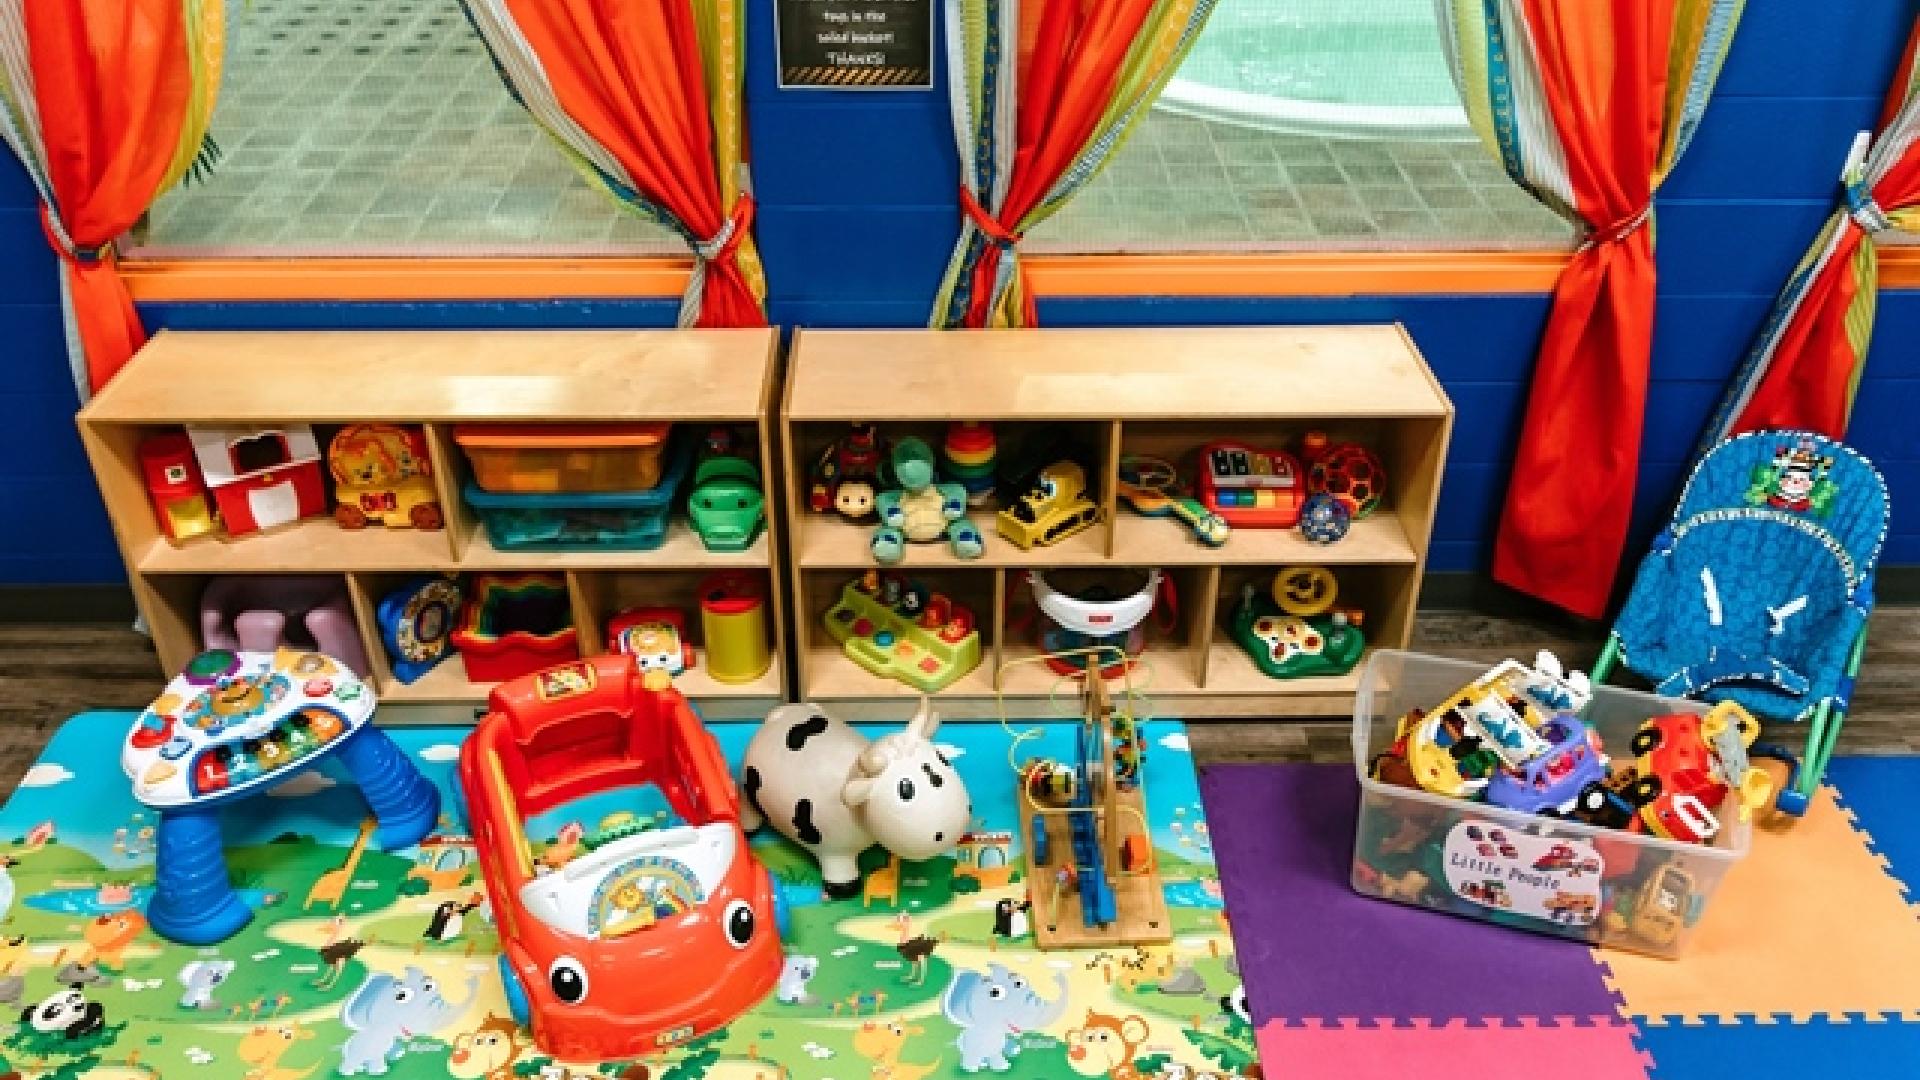 Colourful play area with toys on shelves and the floor. The floor has a foam mat and a colourful rug. There are orange drapes by the windows on the background wall.